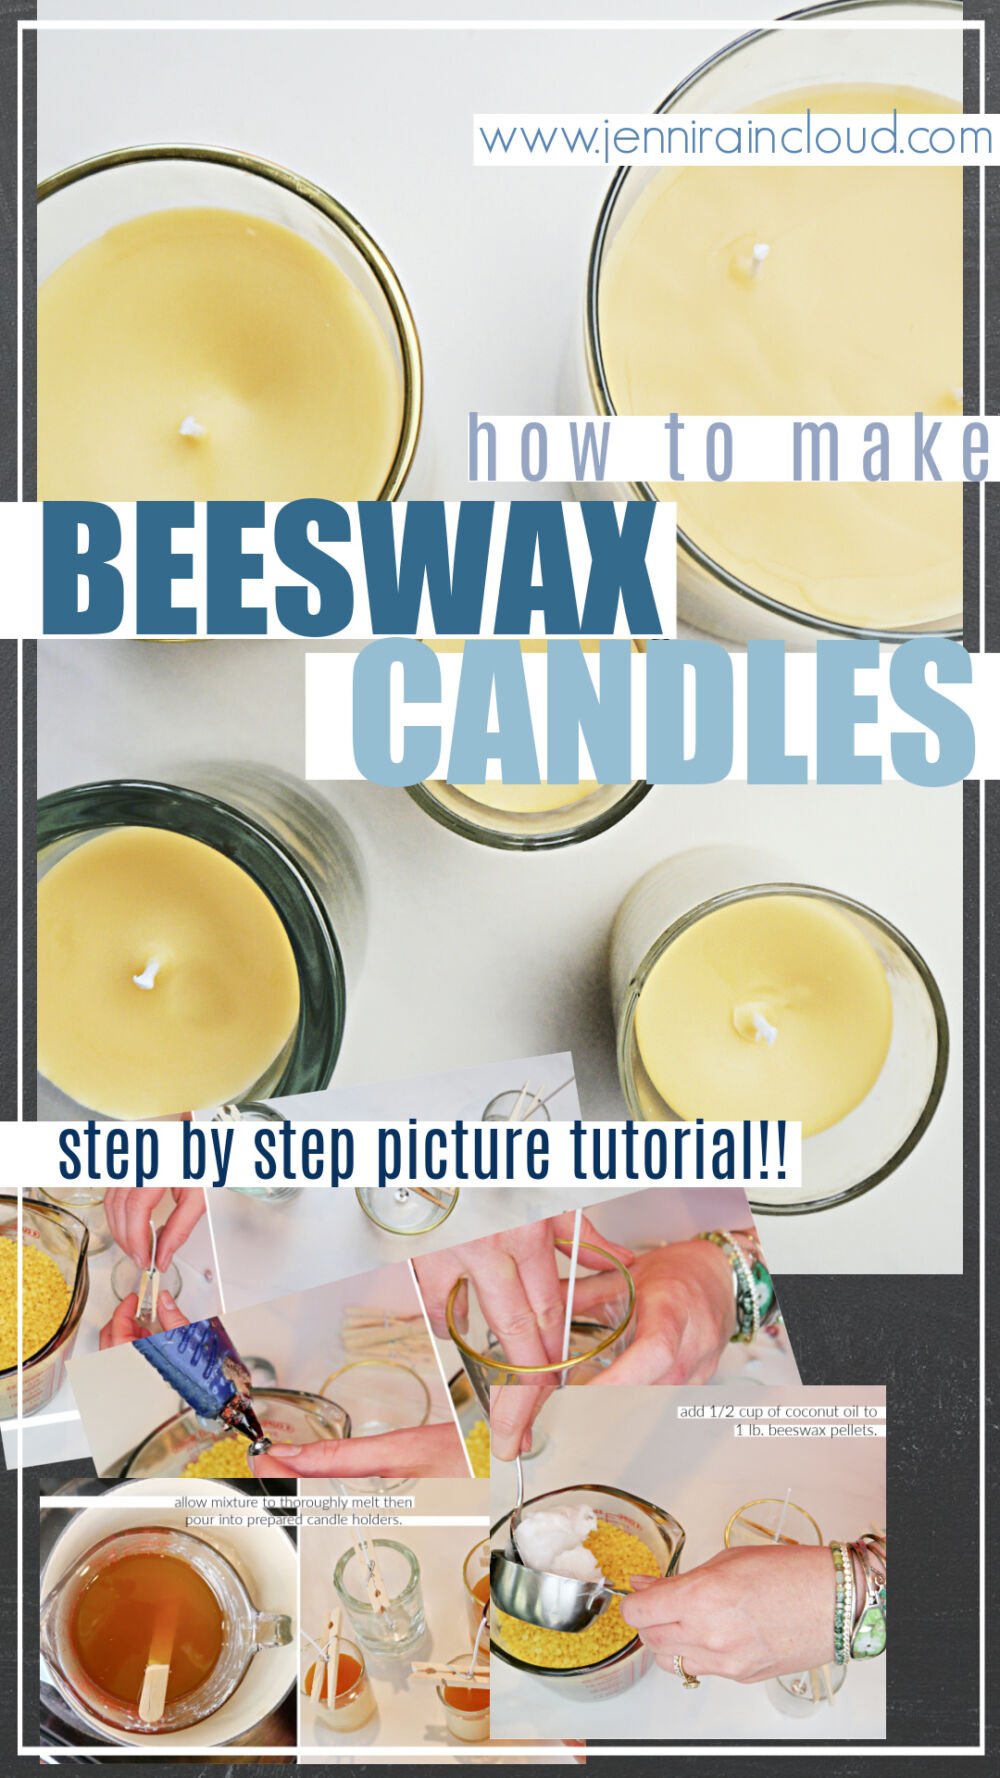 How to make Beeswax Candles pinterest